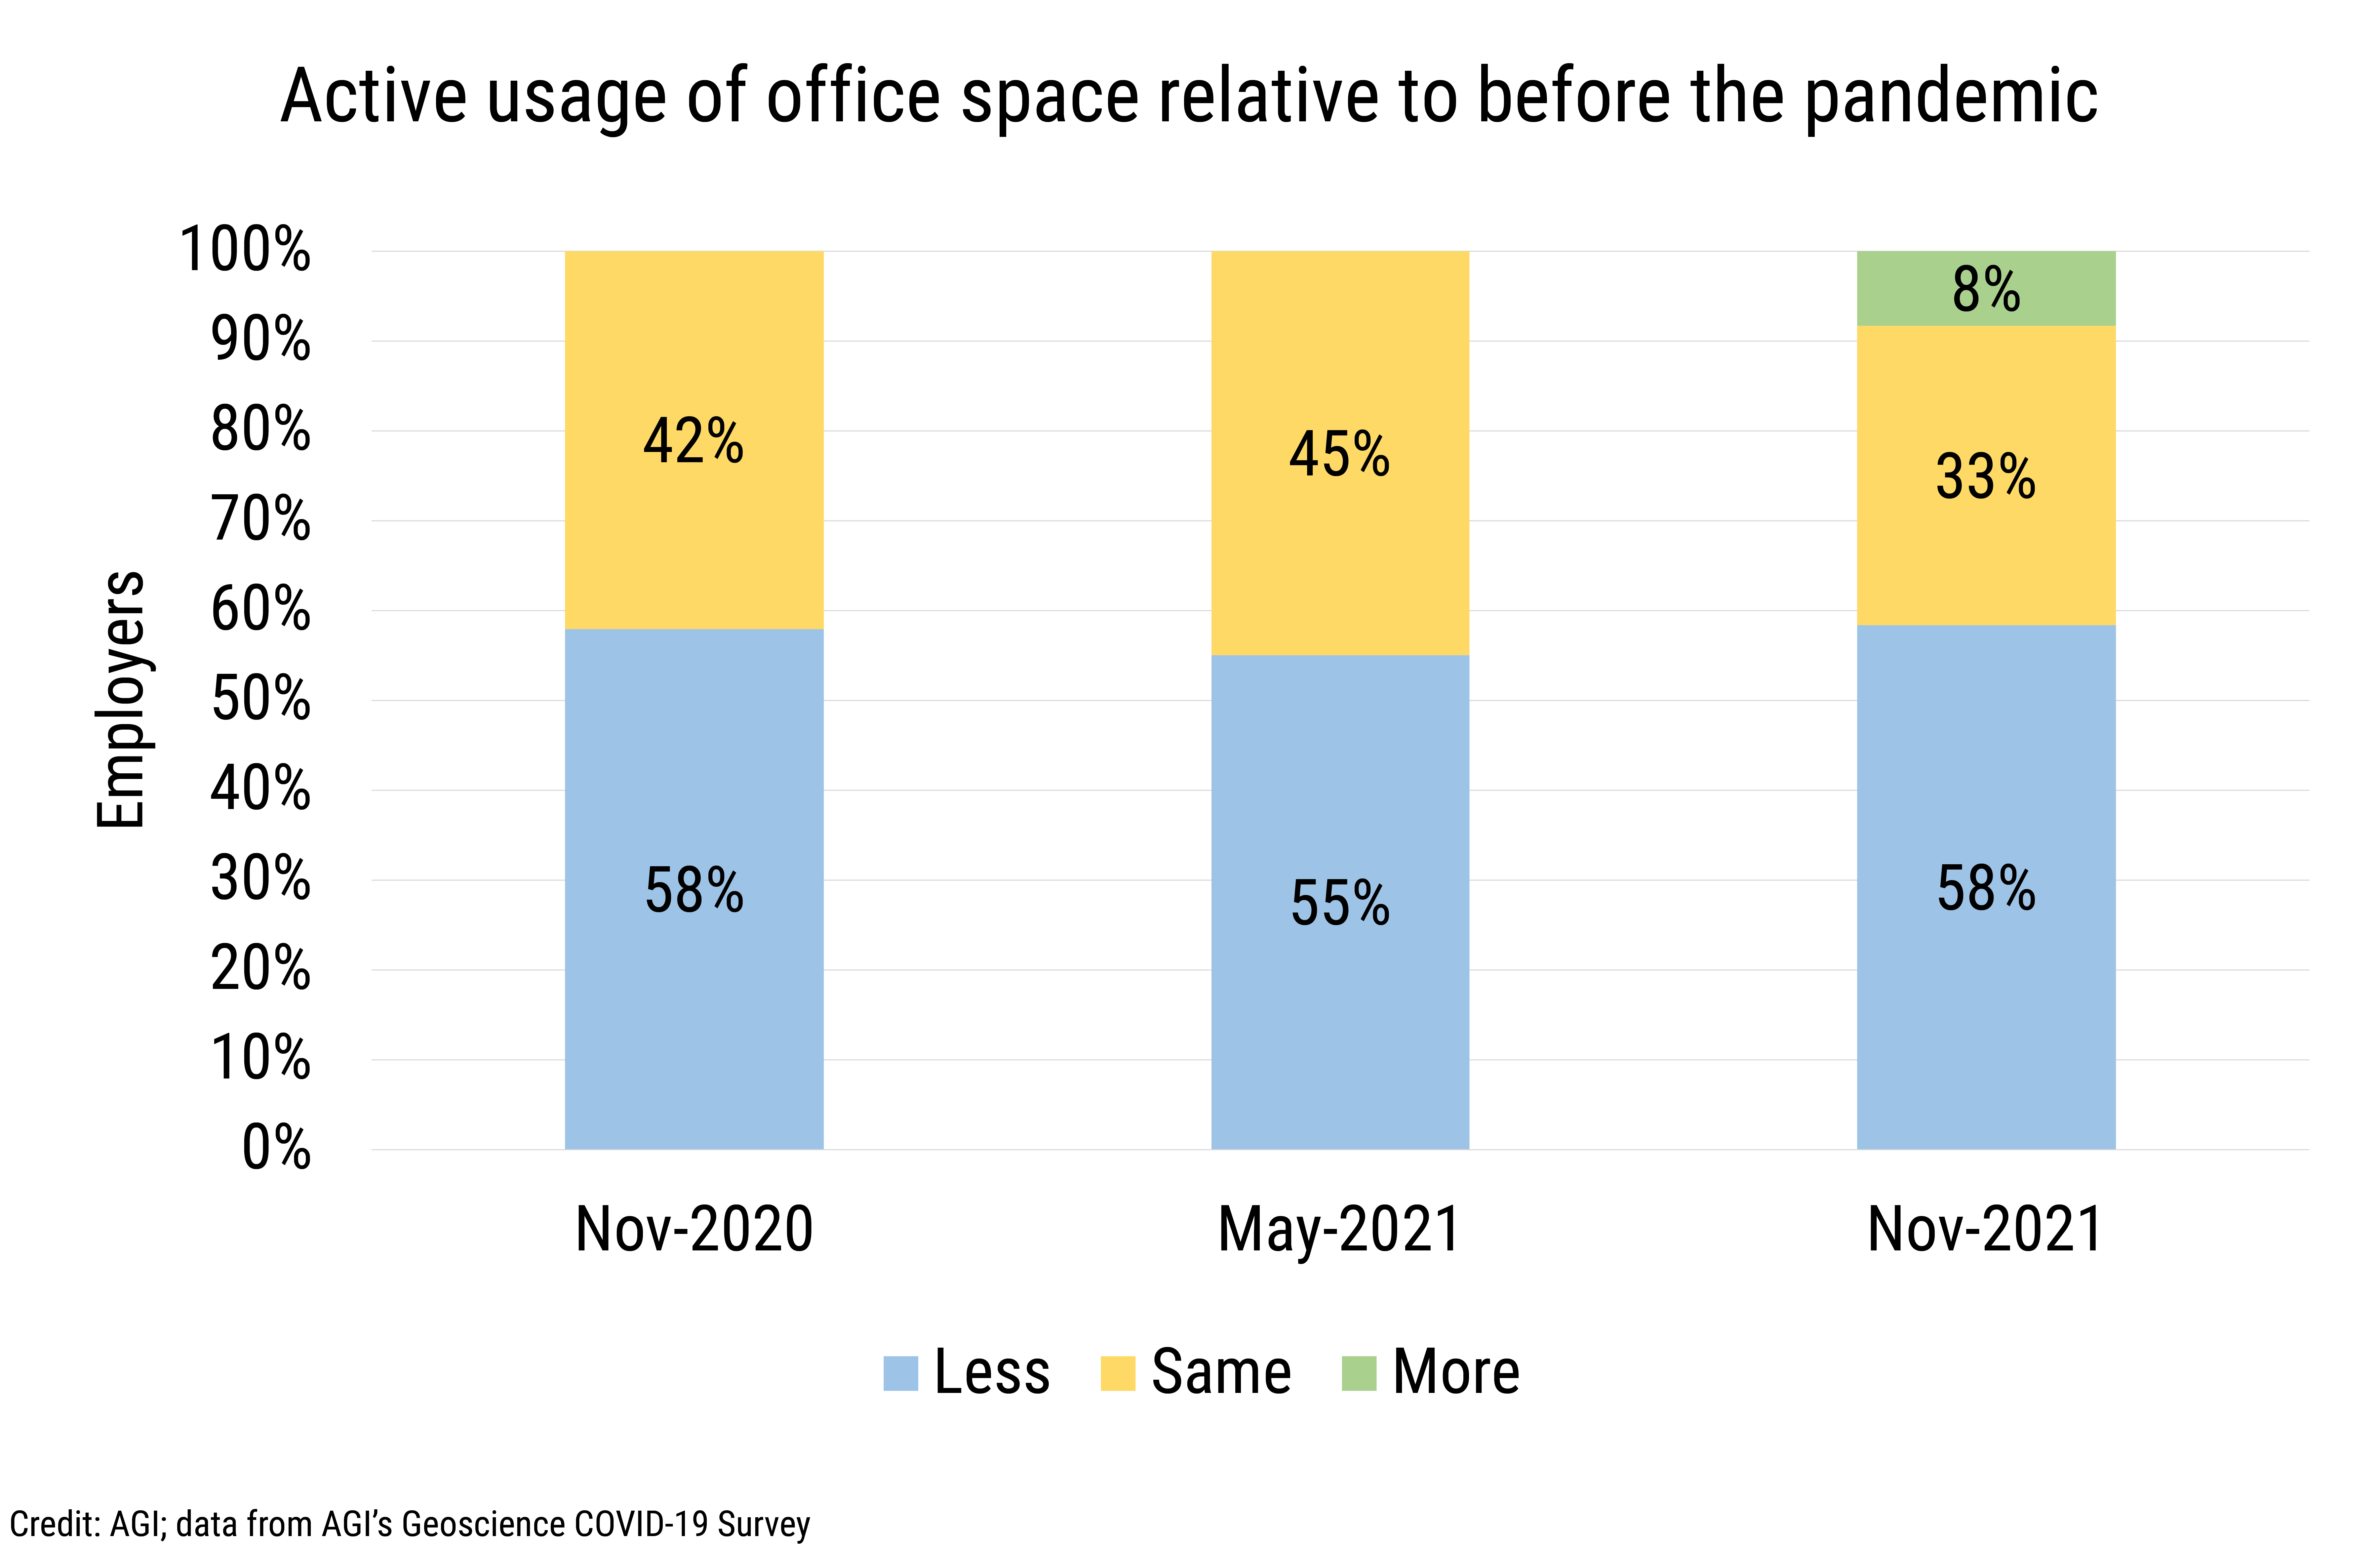 DB_2022-002 chart 08: Active usage of office space relative to before the pandemic (Credit: AGI; data from AGI's Geoscience COVID-19 Survey)